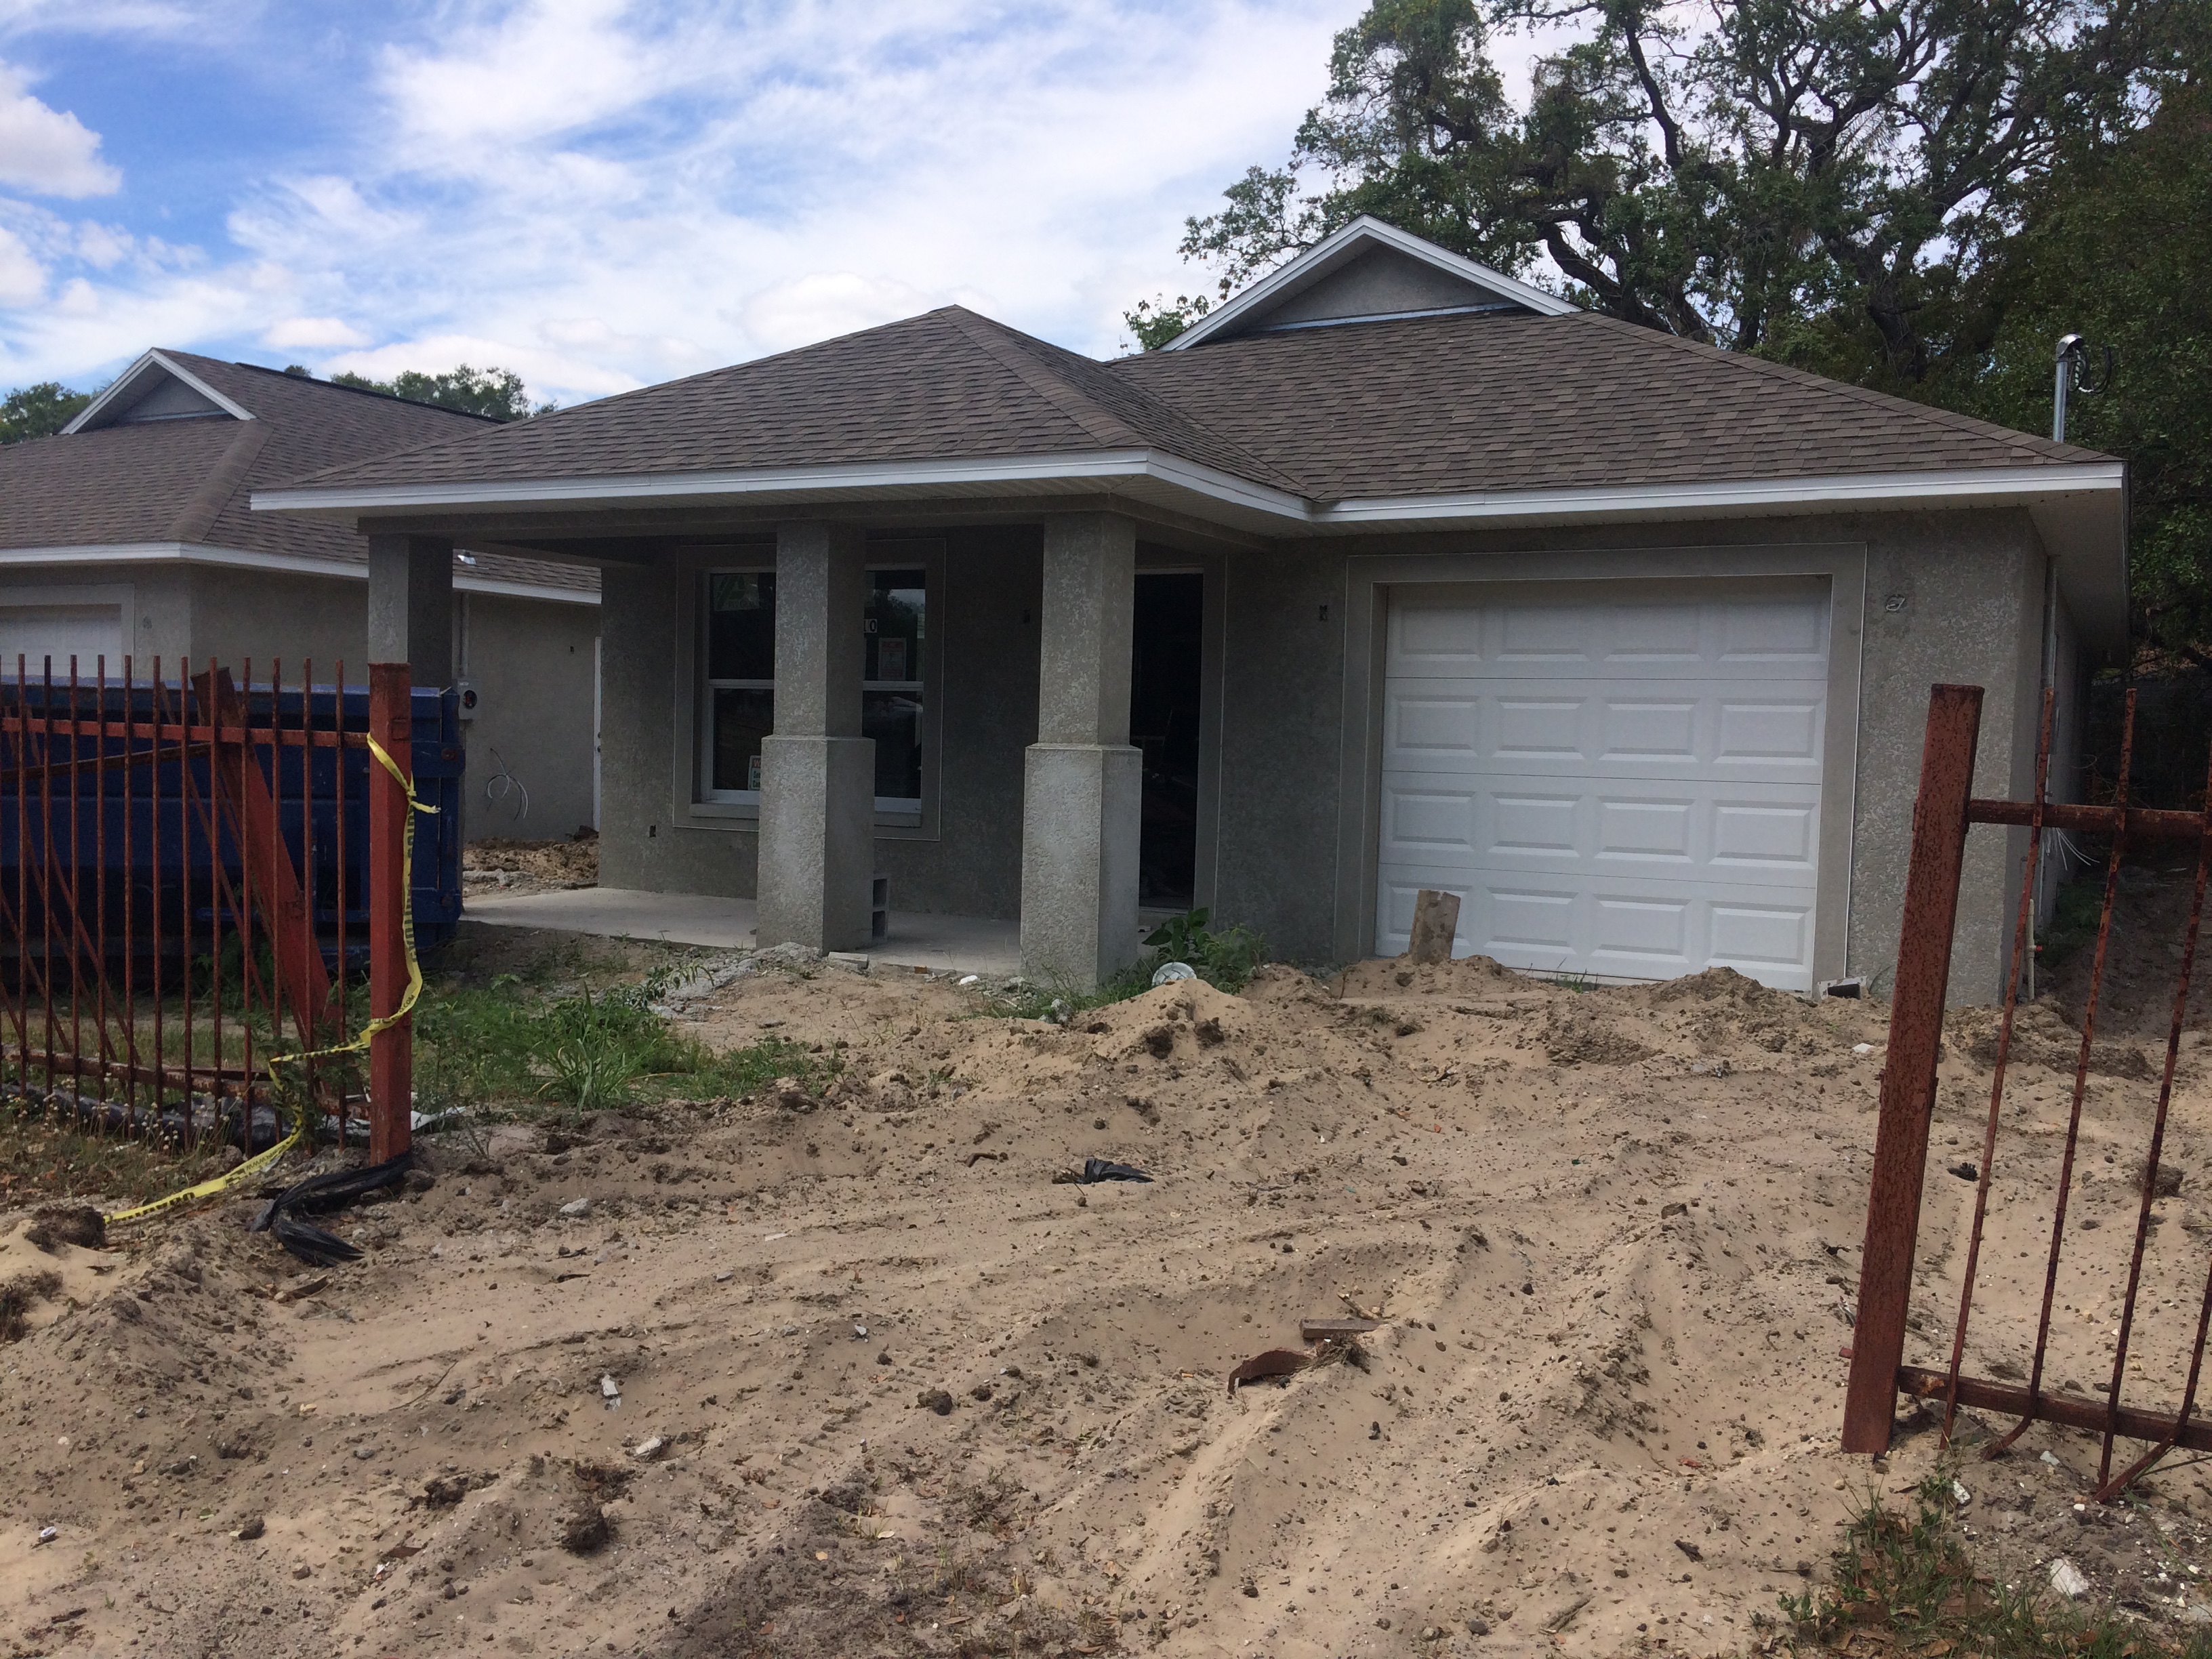 This three-bedroom home is one of 13 being built by the Corporation to Develop Communities of Tampa to bring new housing options to underserved communities